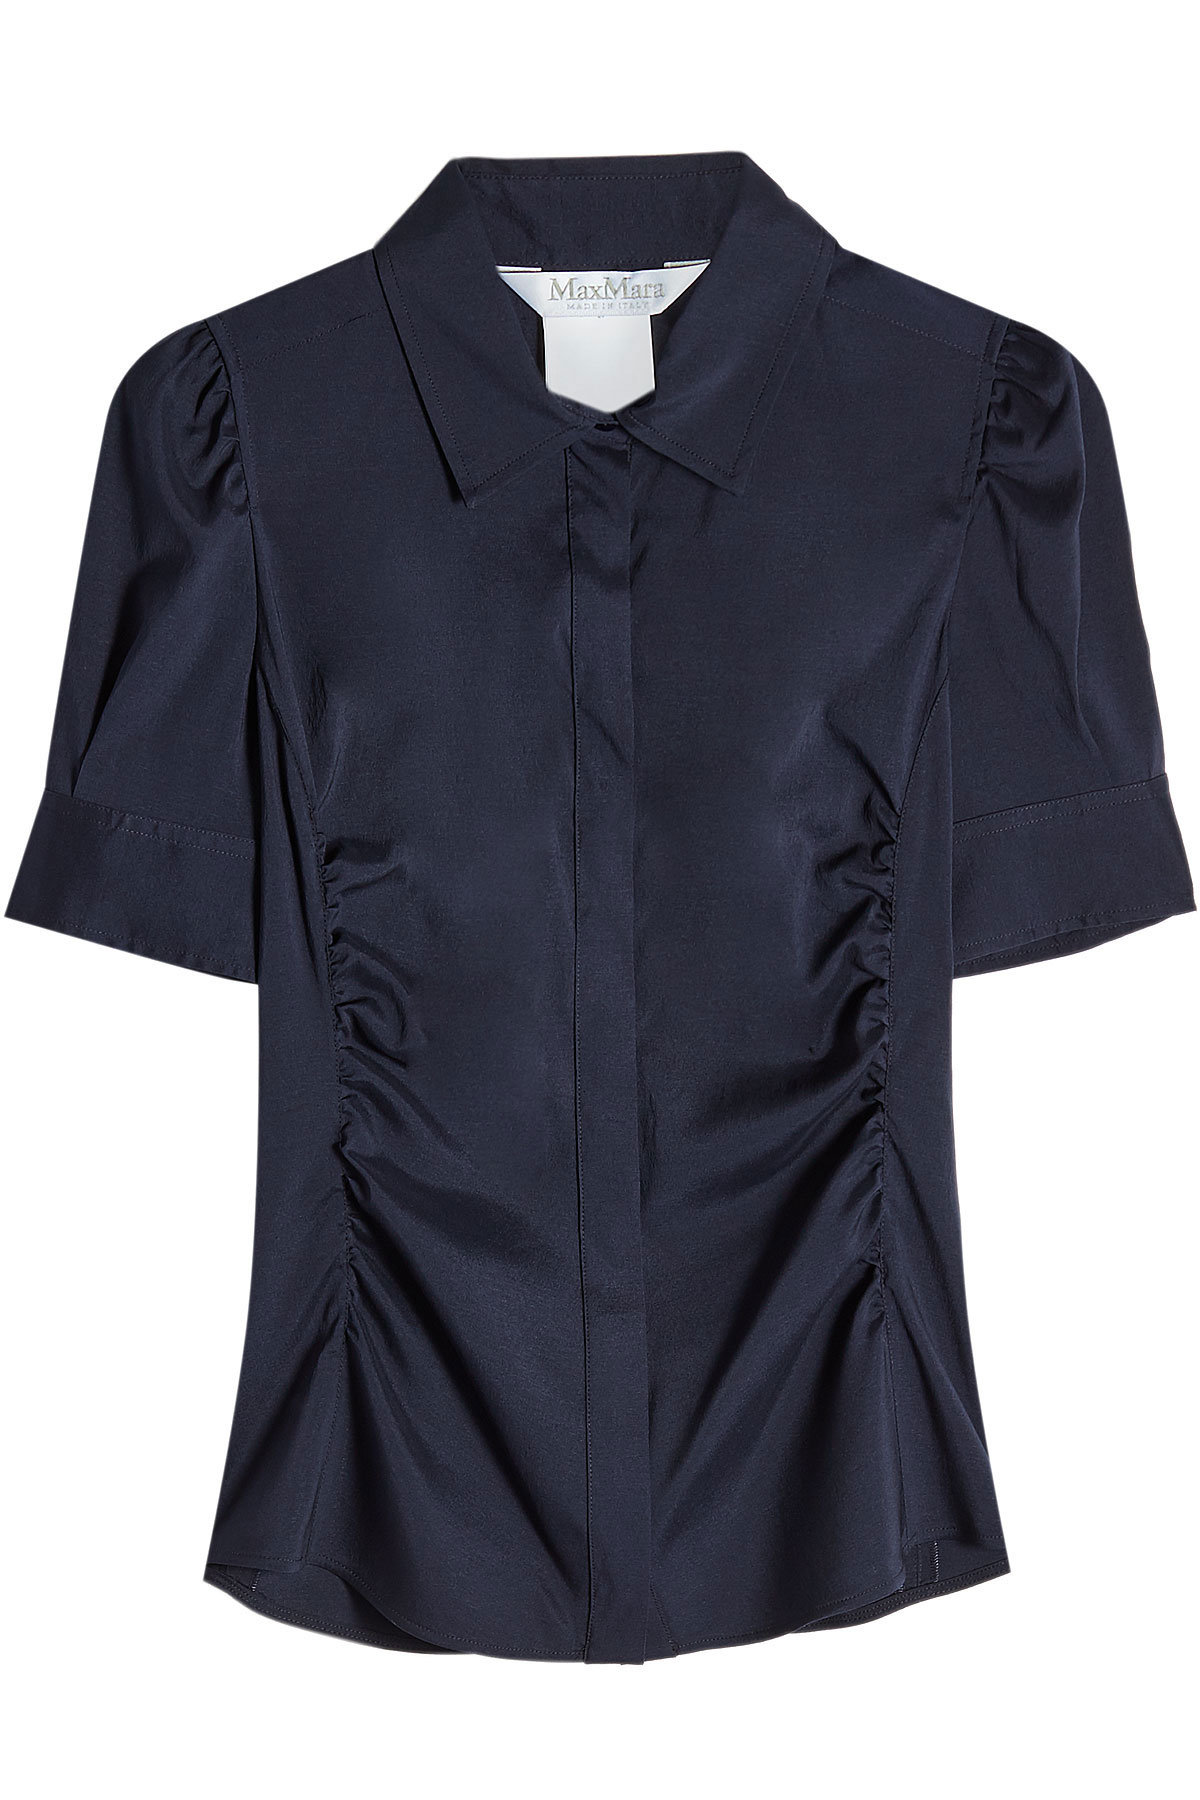 Max Mara - Blouse with Silk and Wool